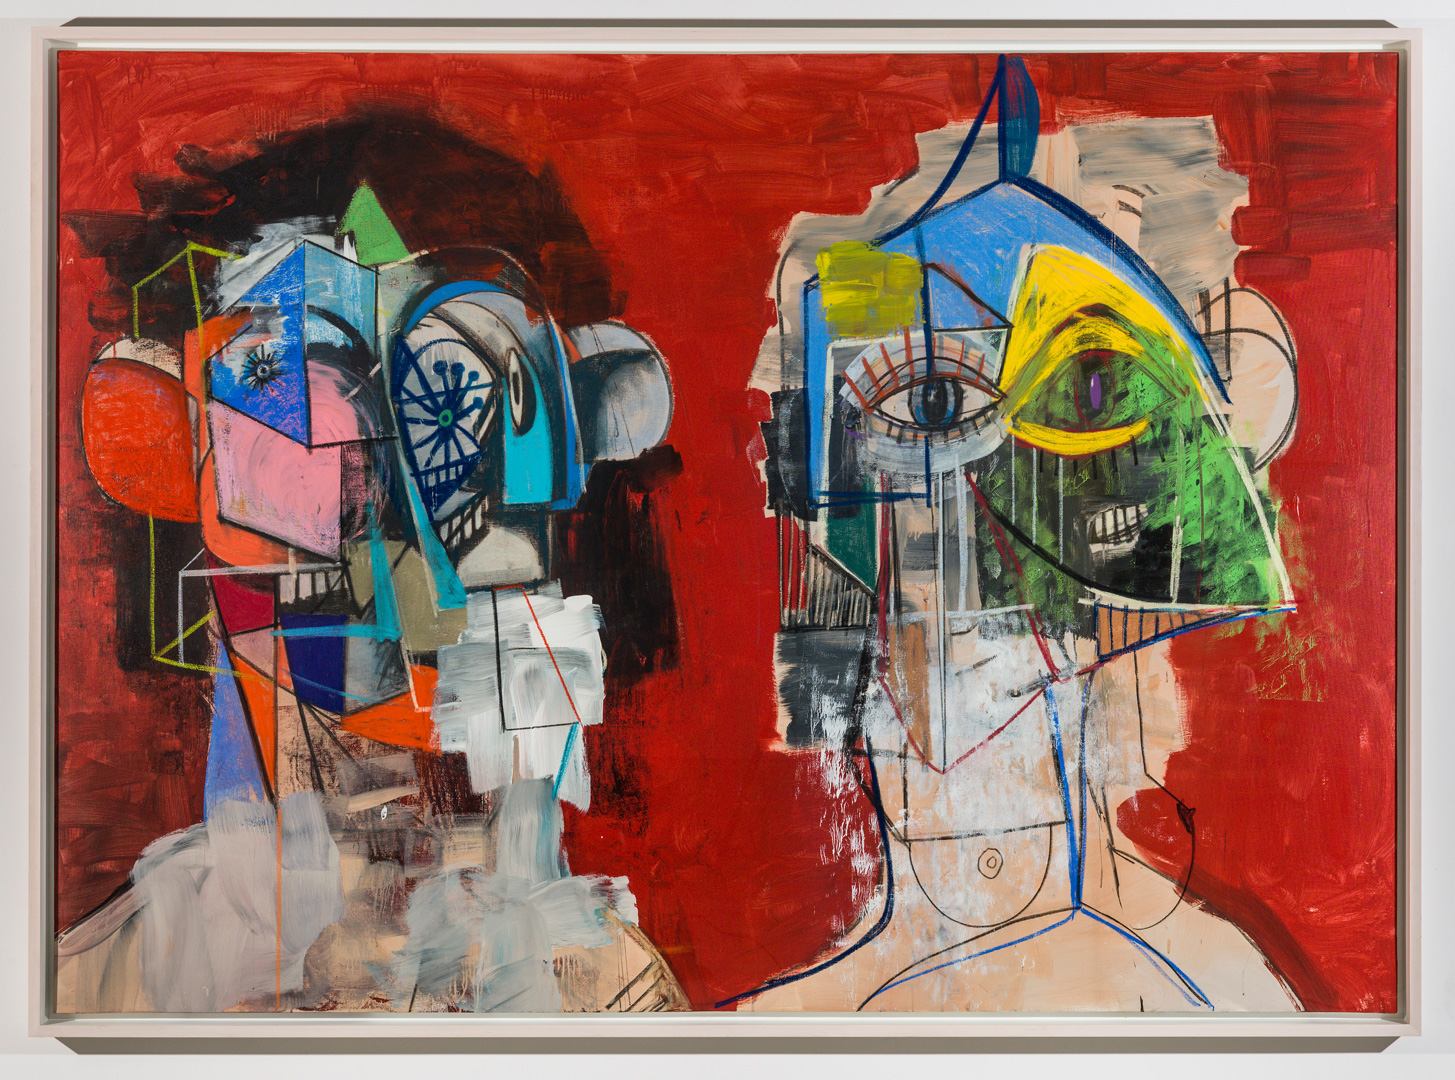 George Condo - Double Heads on Red, 2014, acrylic, charcoal, pastel on linen